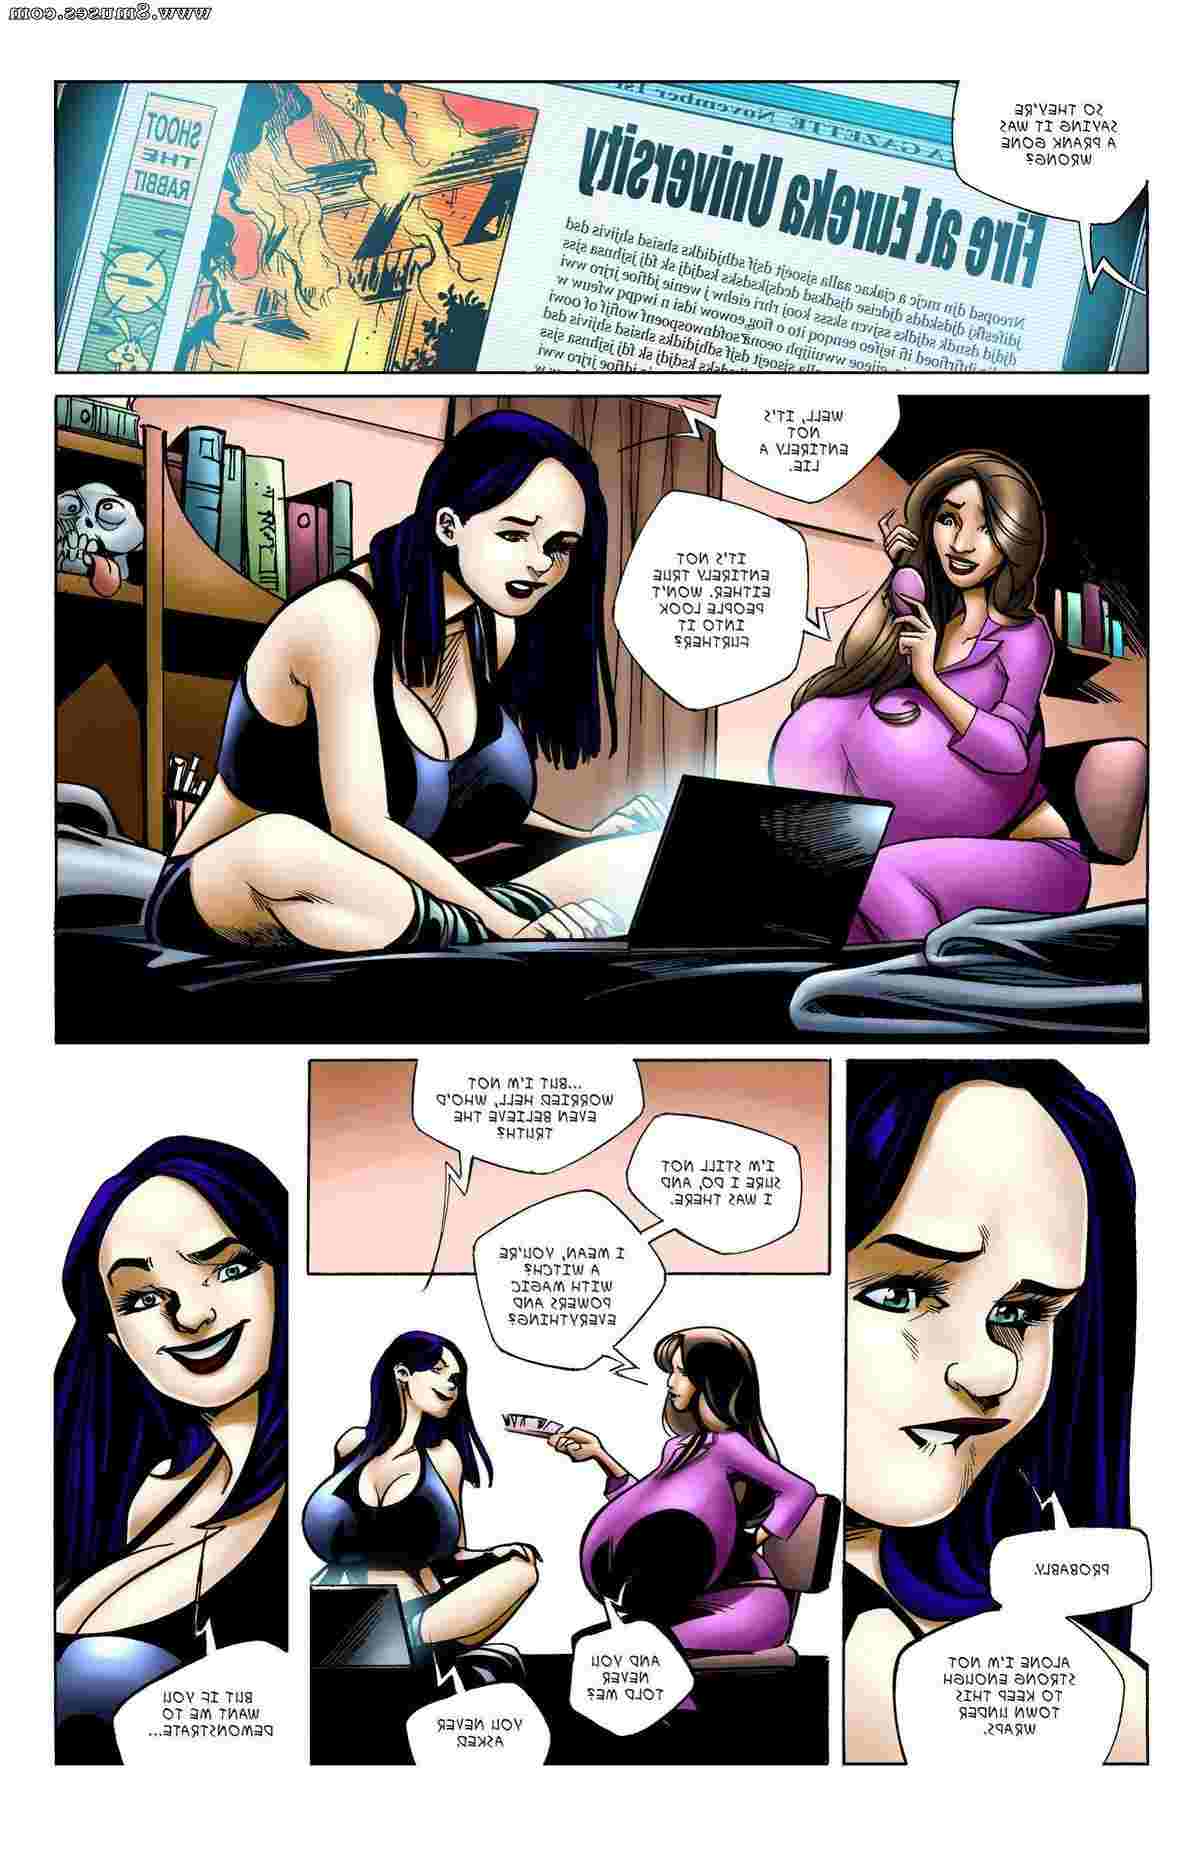 BE-Story-Club-Comics/Welcome-to-Chastity Welcome_to_Chastity__8muses_-_Sex_and_Porn_Comics_128.jpg